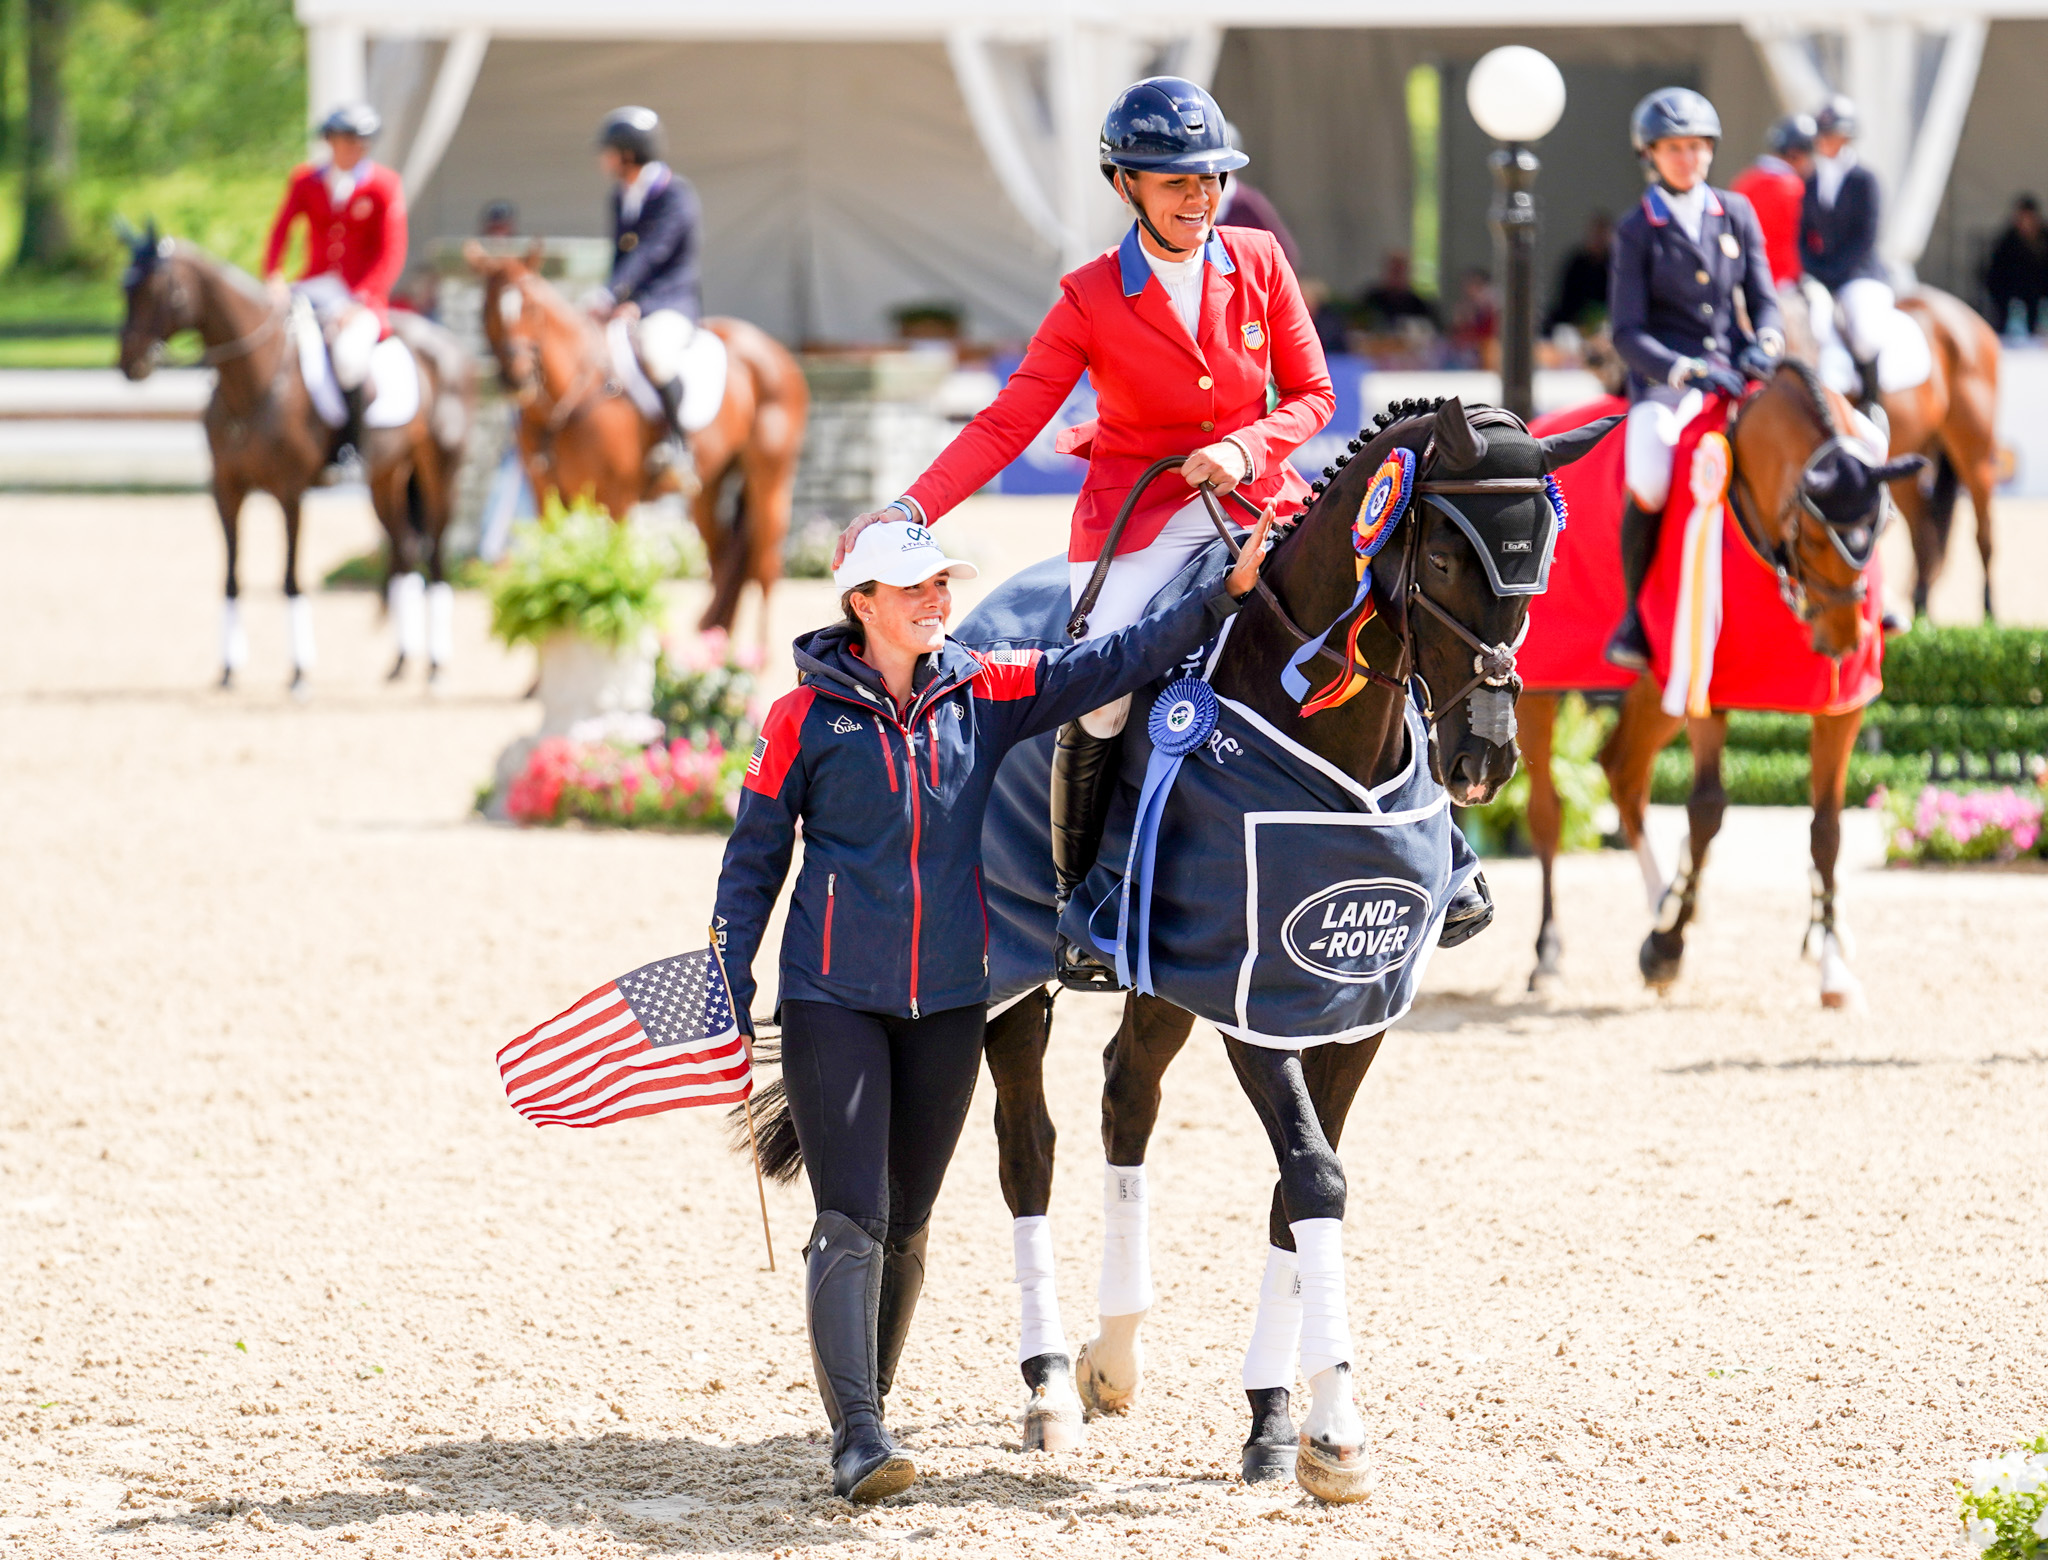 Savannah Gwin and Tamie Smith during the prize giving ceremony of the Landrover Kentucky Three-Day Event- photo credit Avery Wallace/US Equestrian